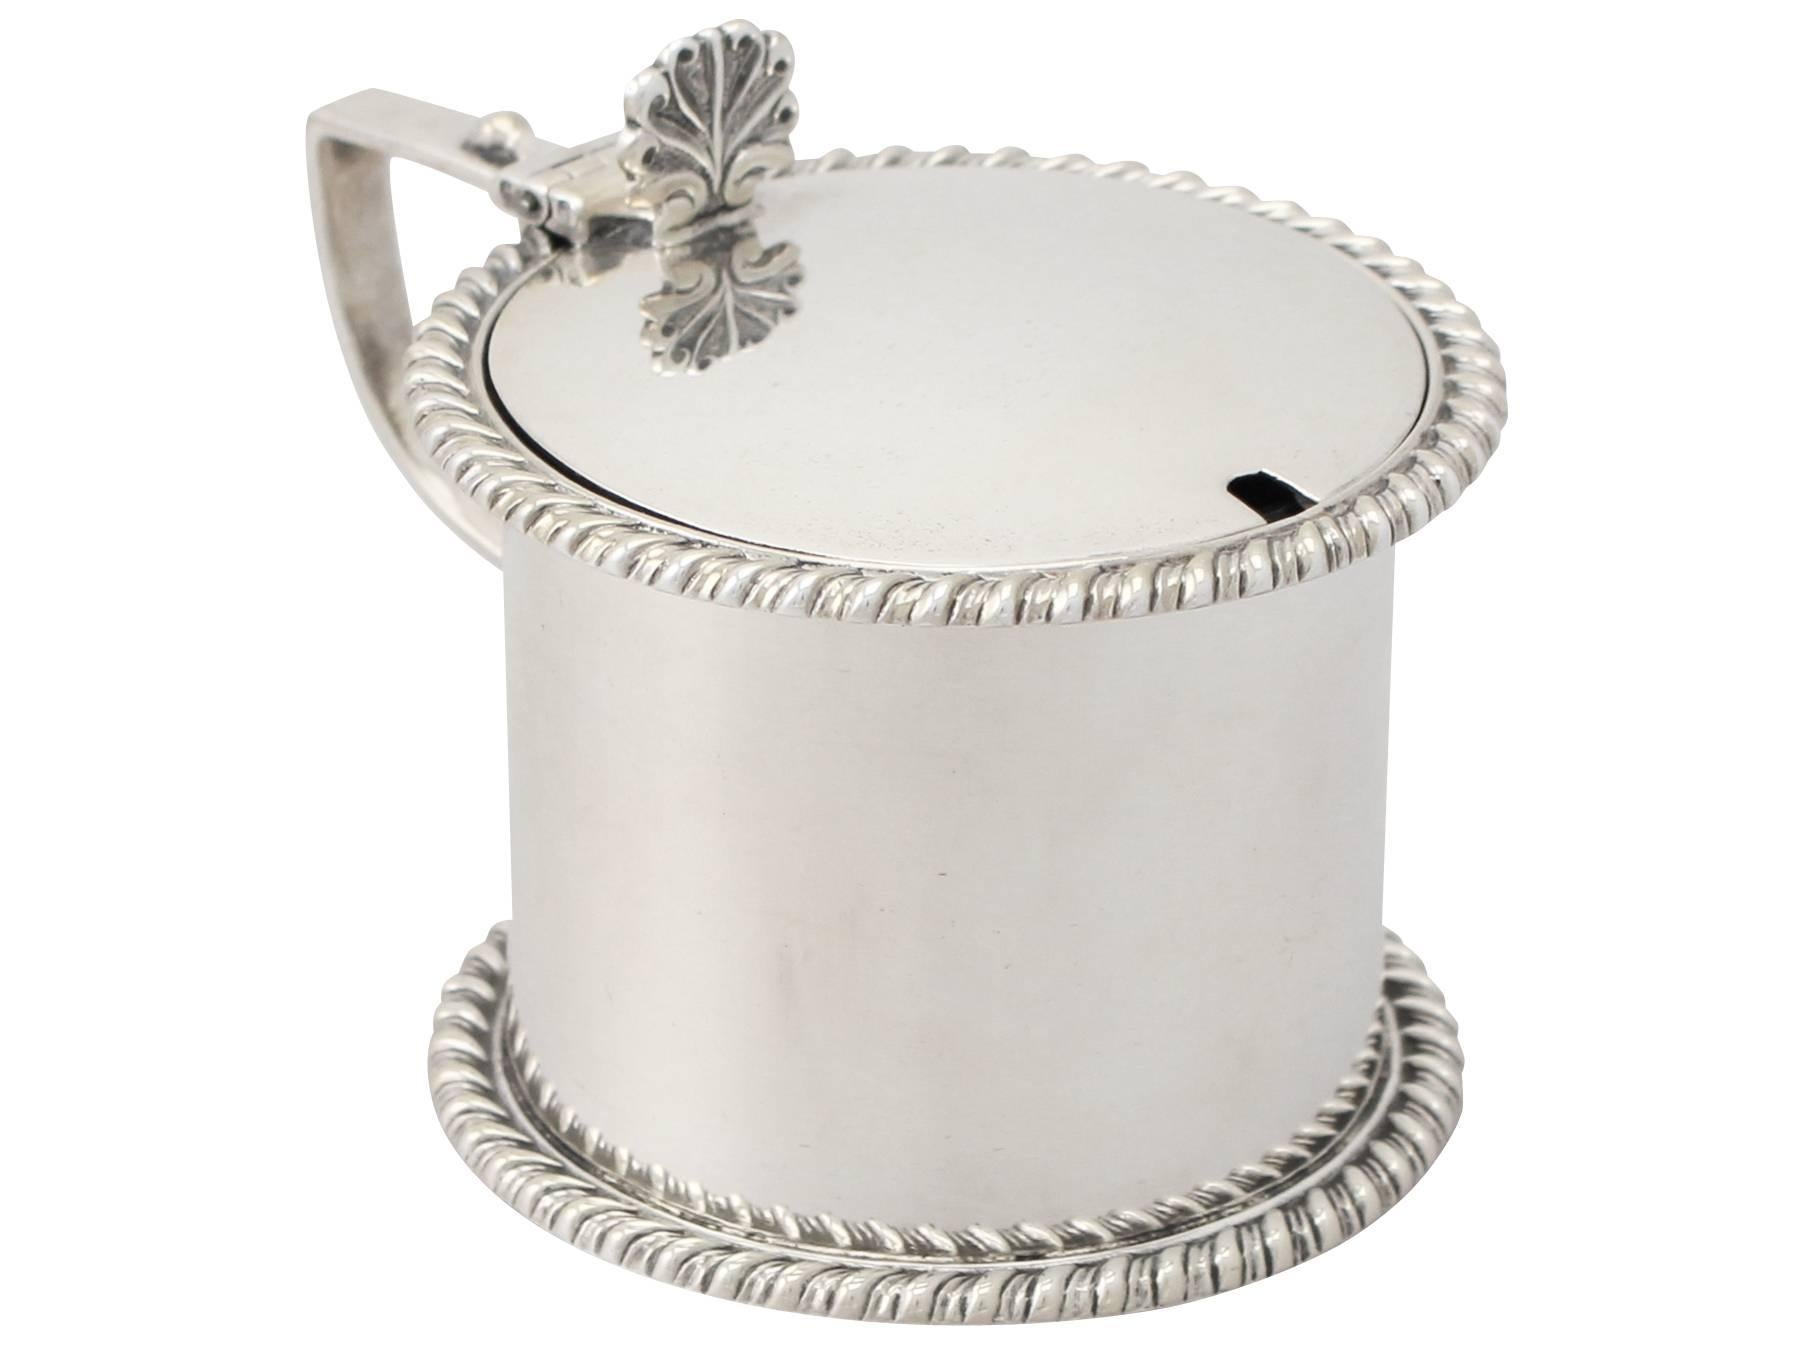 A fine antique Victorian English sterling silver drum mustard pot; an addition to our silver cruets / condiments collection.

This antique Victorian sterling silver mustard pot has a plain cylindrical drum shaped form.

The upper rim and base